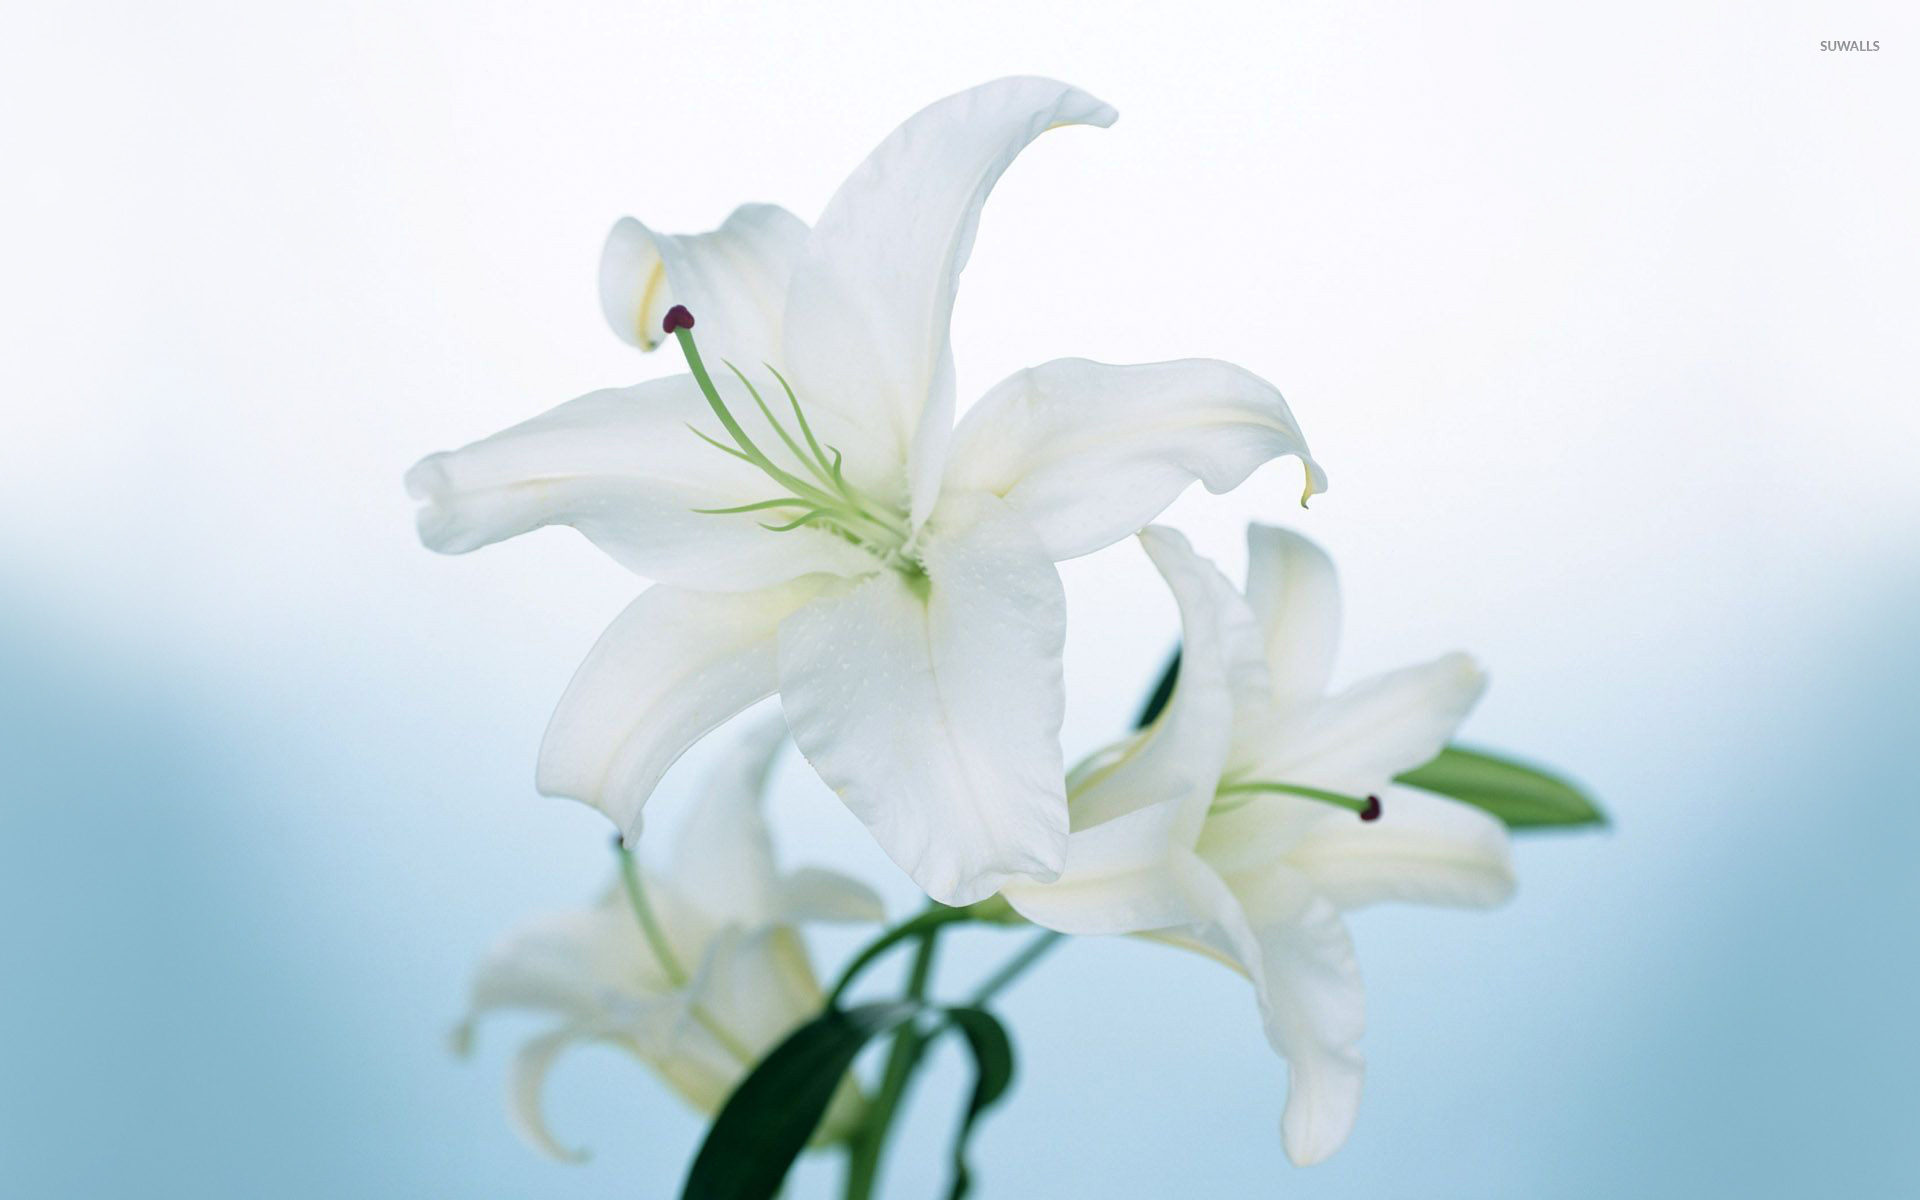 White Lily wallpaper - Flower wallpapers - #4163